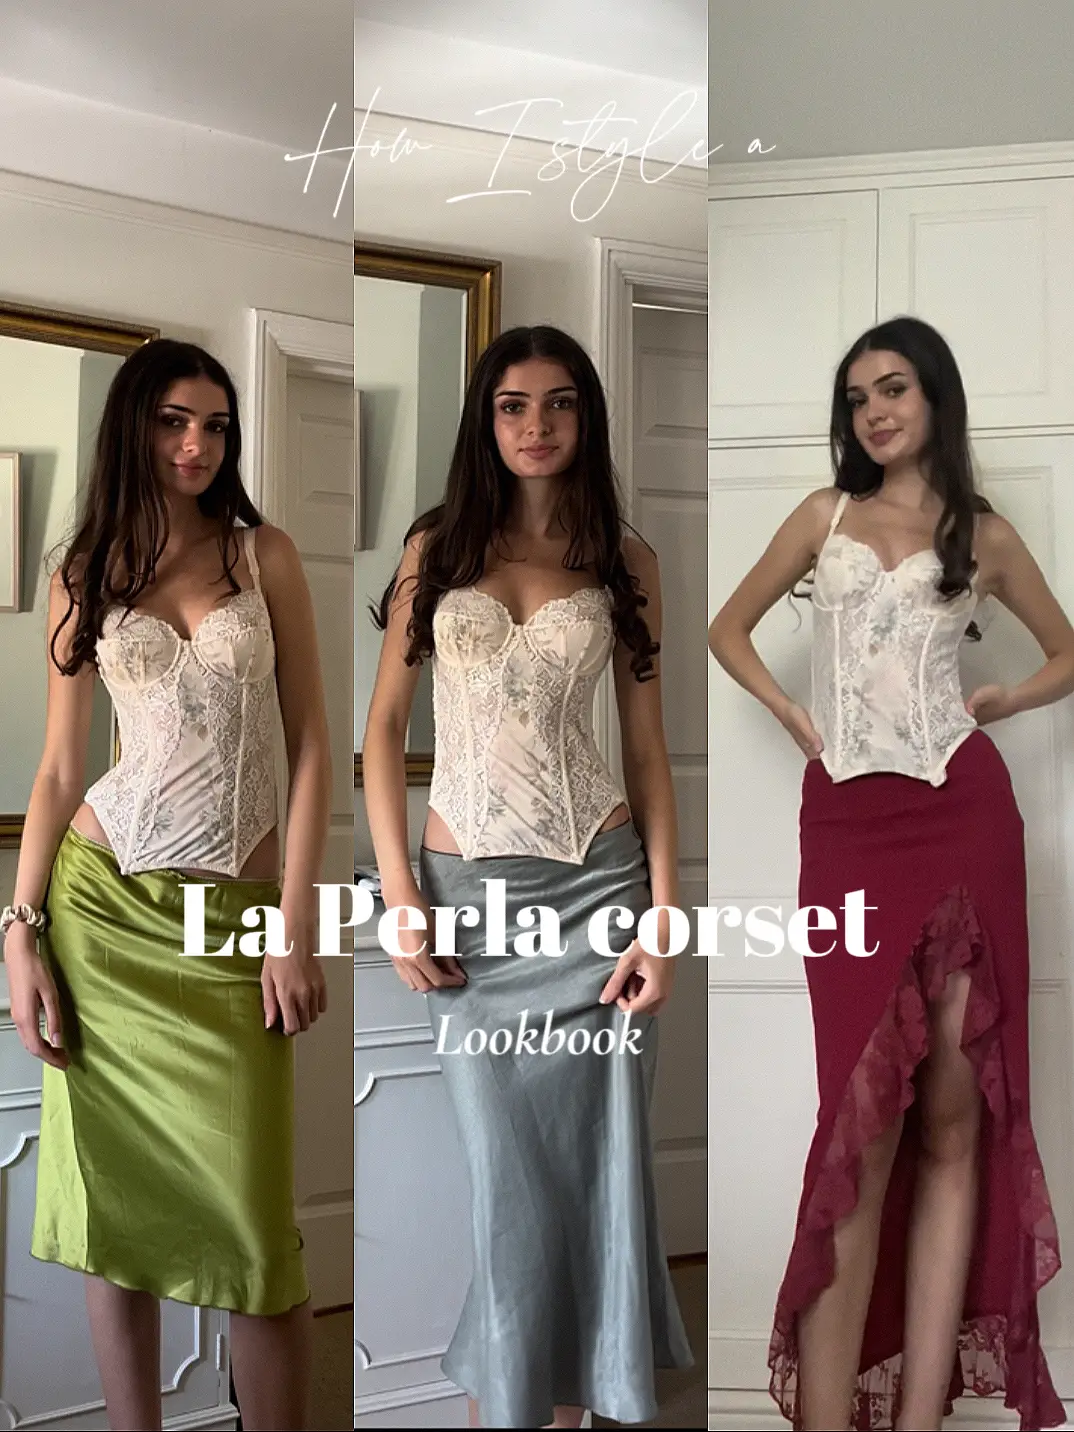 How I style a La Perla corset, Lookbook, Gallery posted by Alexa Clover